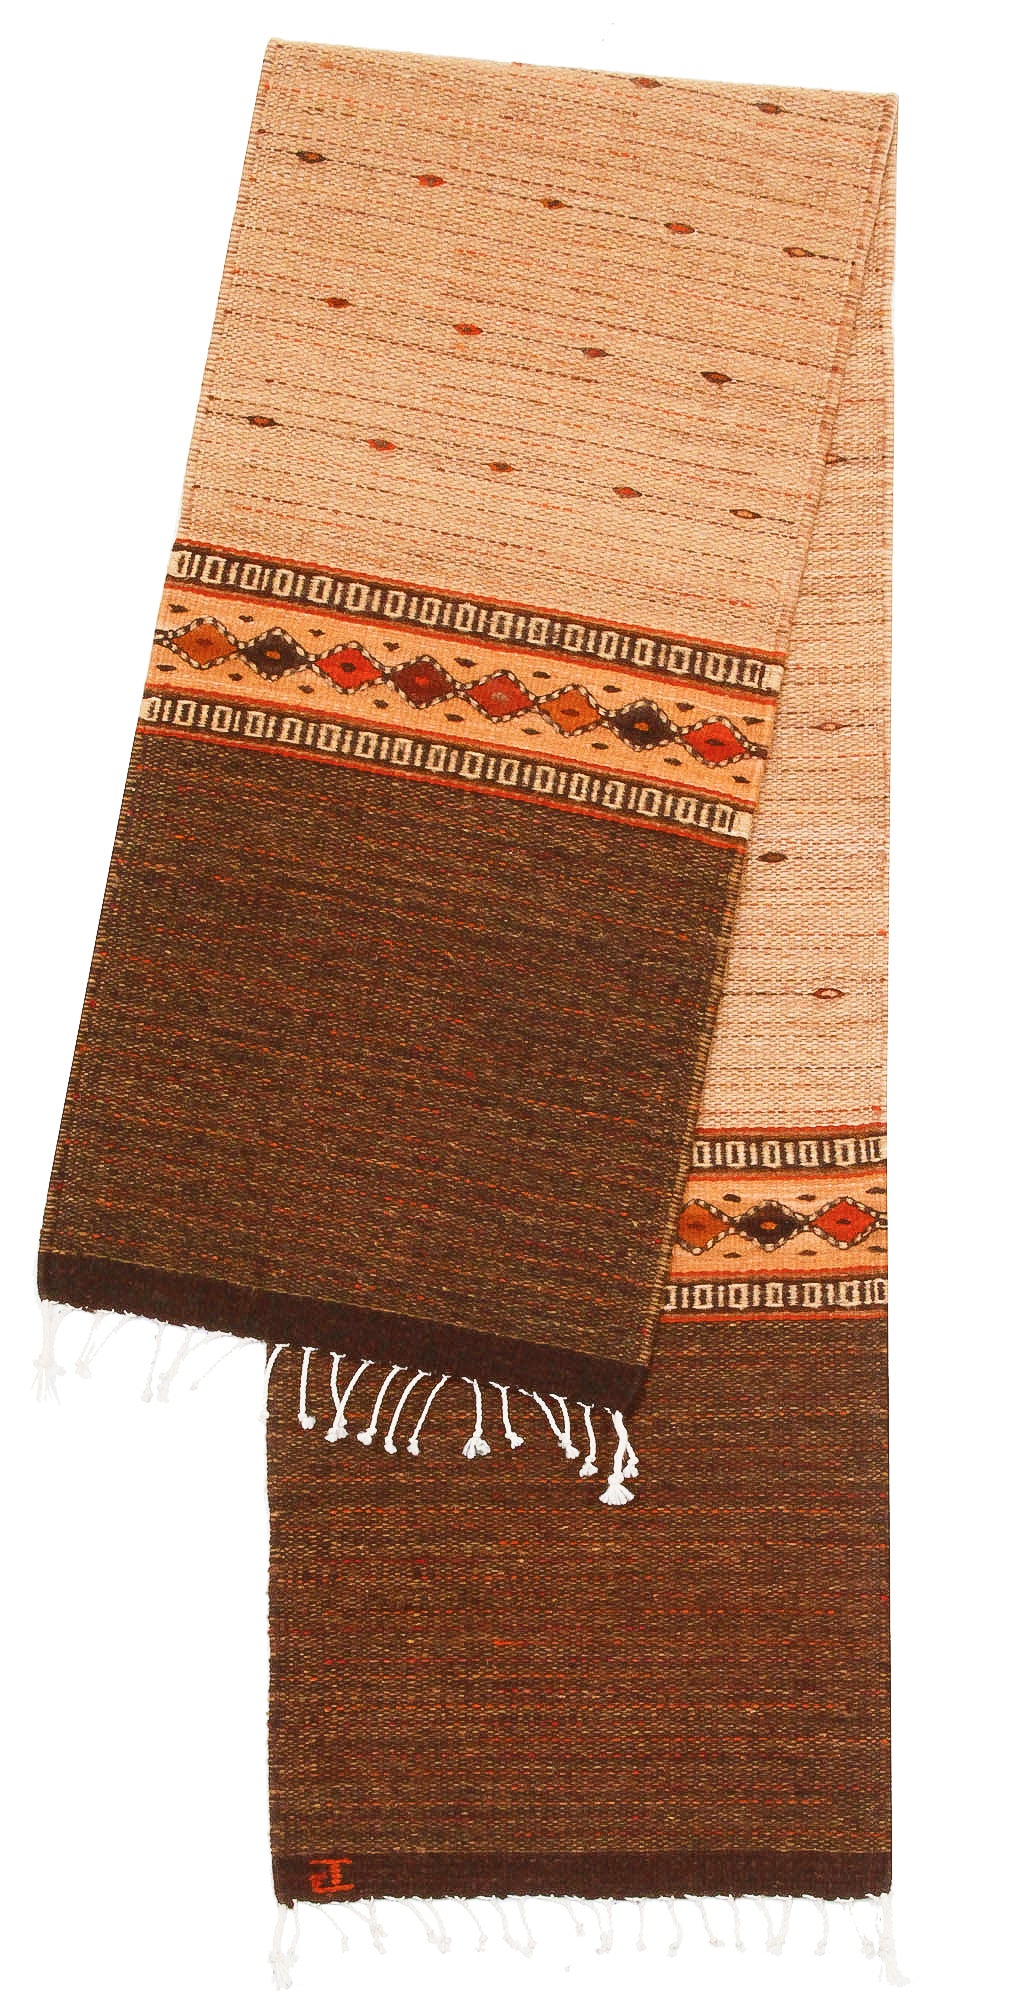 Handwoven Zapotec Indian Table Runner - Earth and Sky Dusk Wool Oaxacan Textile